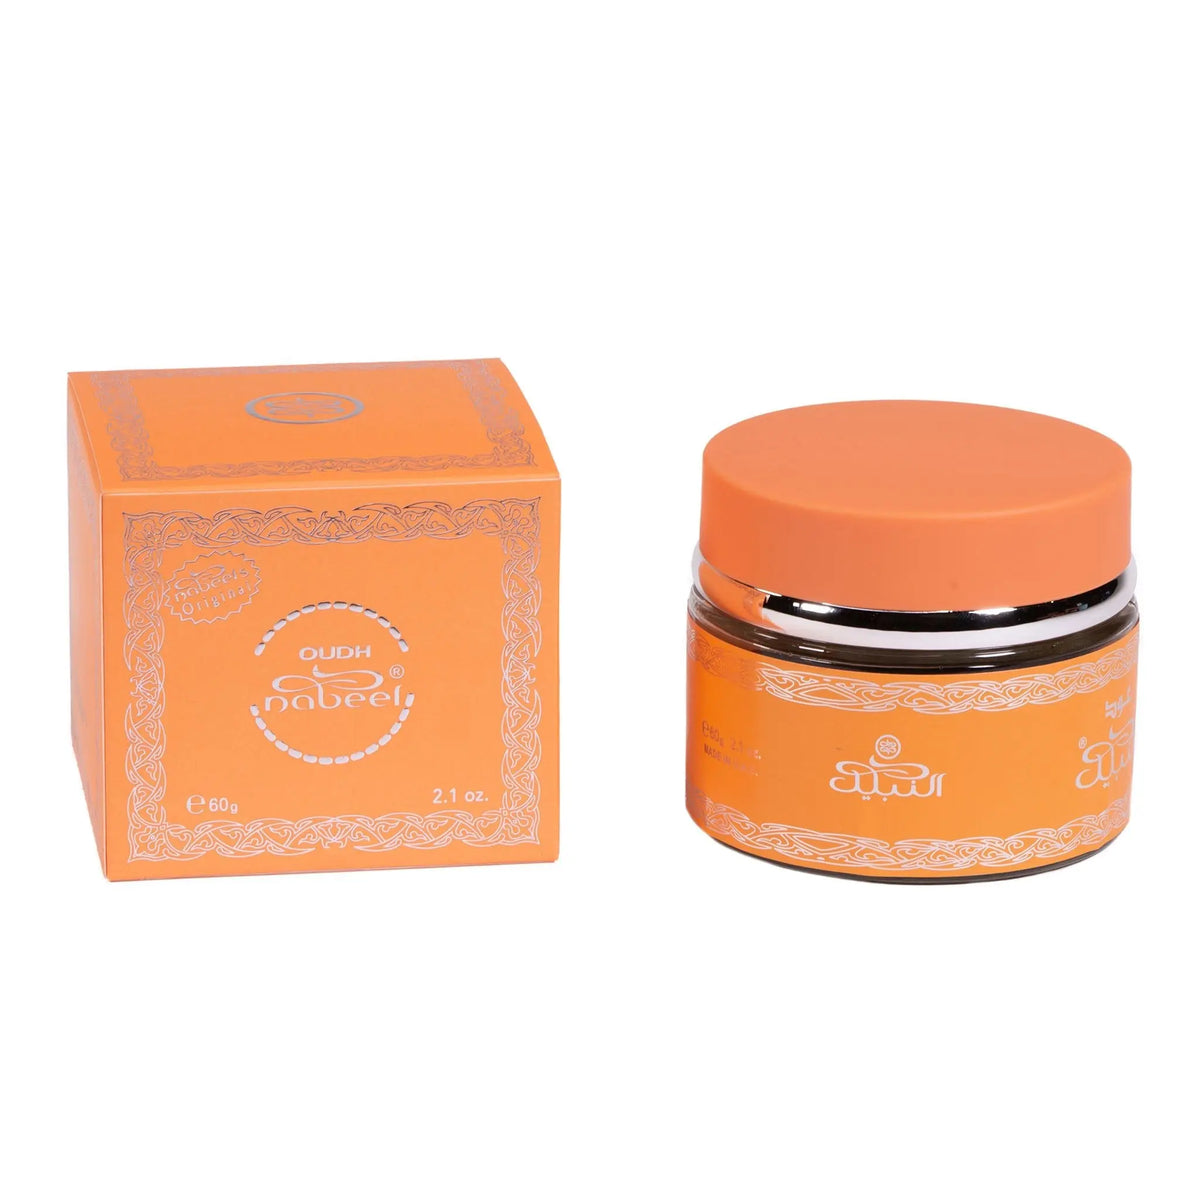 he image shows a product from Nabeel Perfumes, specifically their Oudh variant. On the left is a square orange box with white lace pattern borders and the product information in white text that reads "OUDH Nabeel." On the right is a round jar with an orange lid and a black band with the Nabeel logo in white Arabic and English text. The jar likely contains the oudh product, and both items are set against a plain white background that emphasizes the product's bright packaging and branding details.